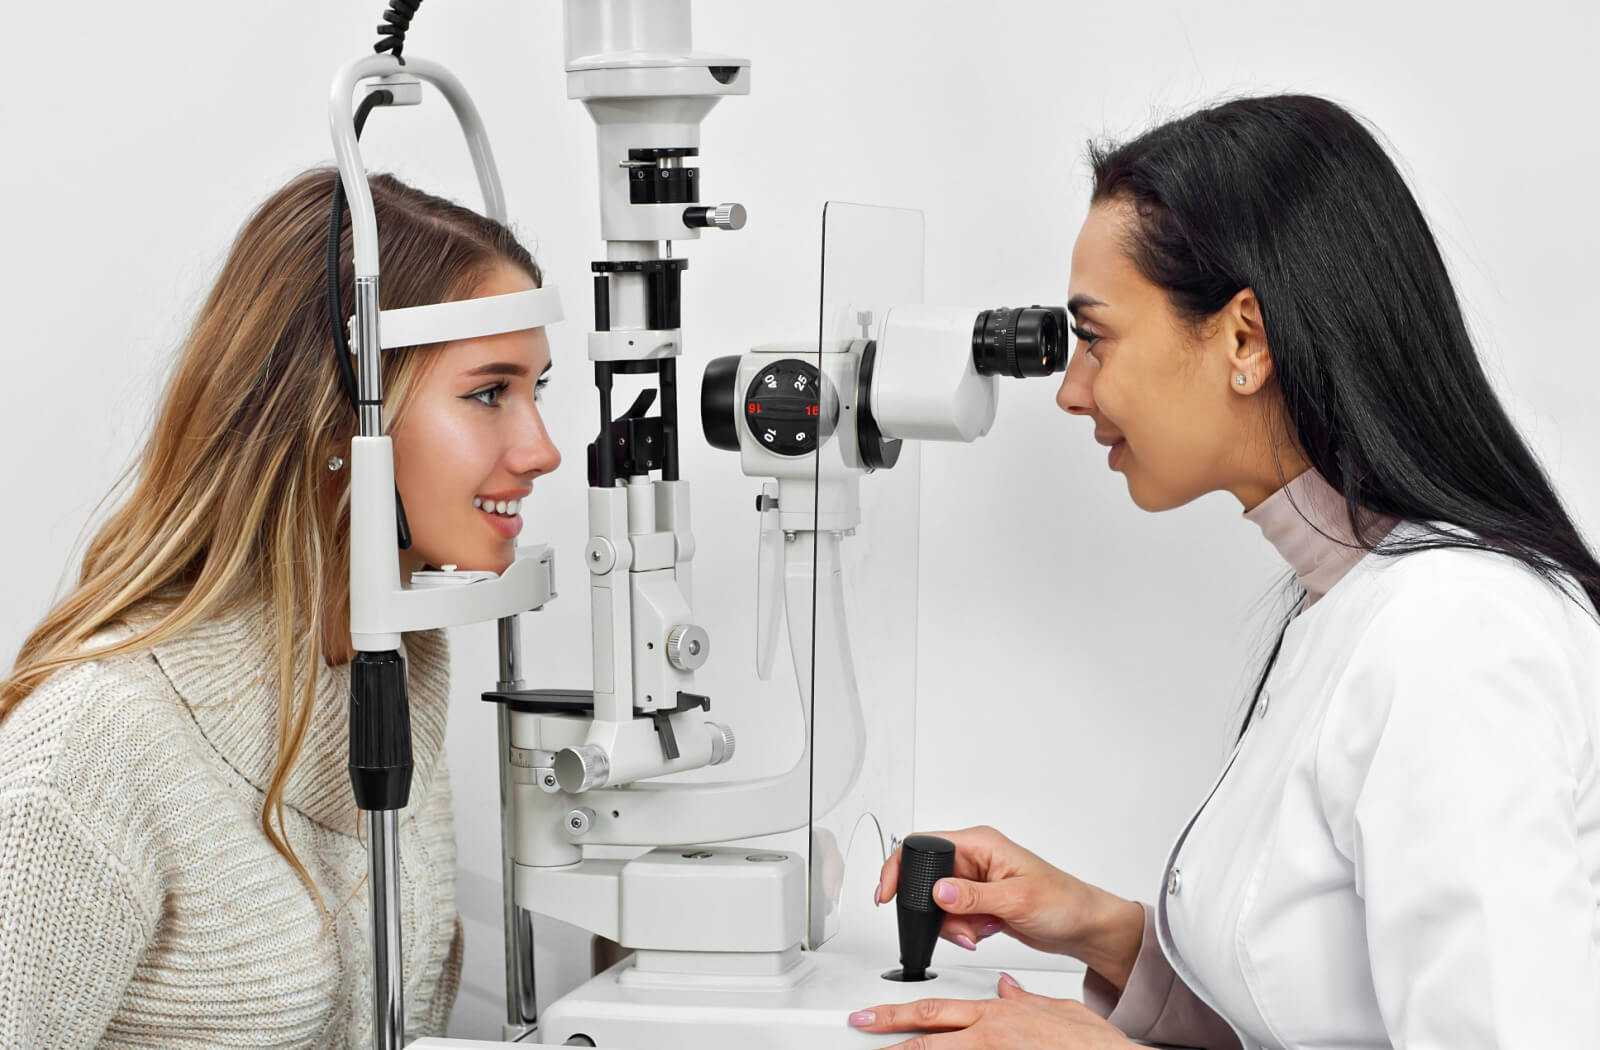 A female optometrist using a medical device to examine the eyes of a female patient and look for potential eye problems.